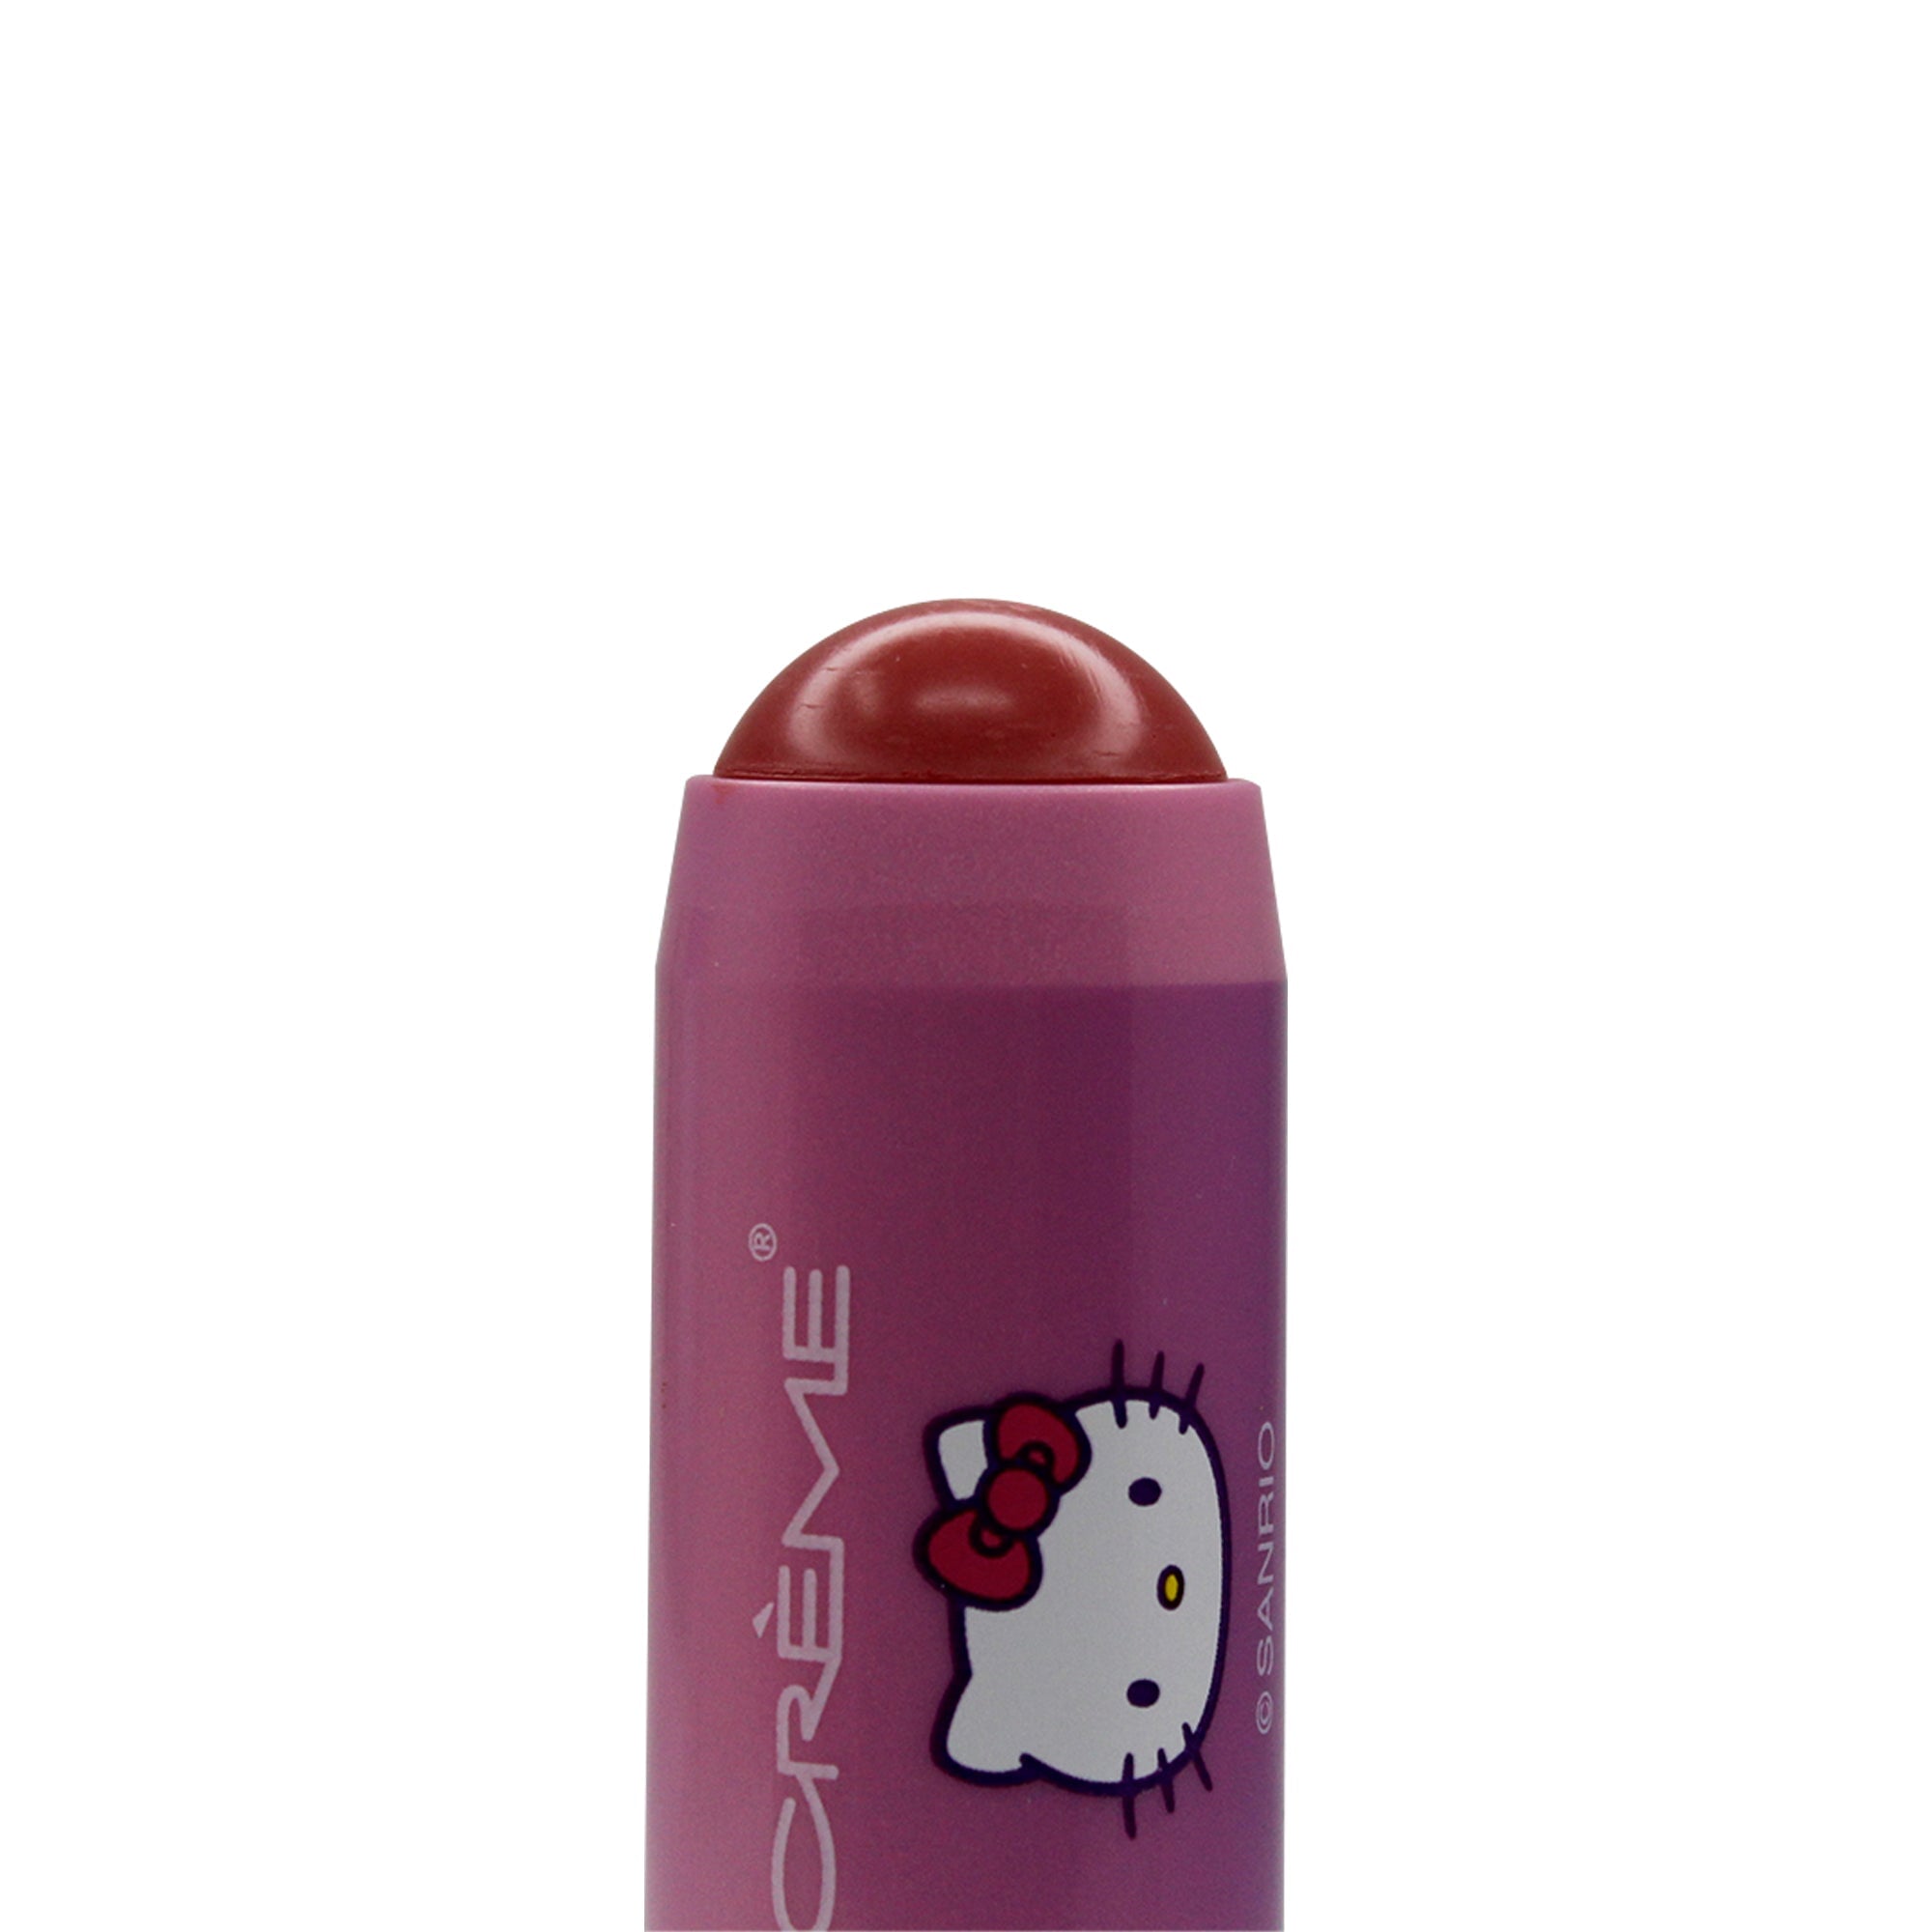 The Crème Shop x Hello Kitty(Purple) 2-In-1 Lip and Cheek Tinted Stick - Berry Delight Lip & Cheek Chic Stick The Crème Shop x Sanrio 